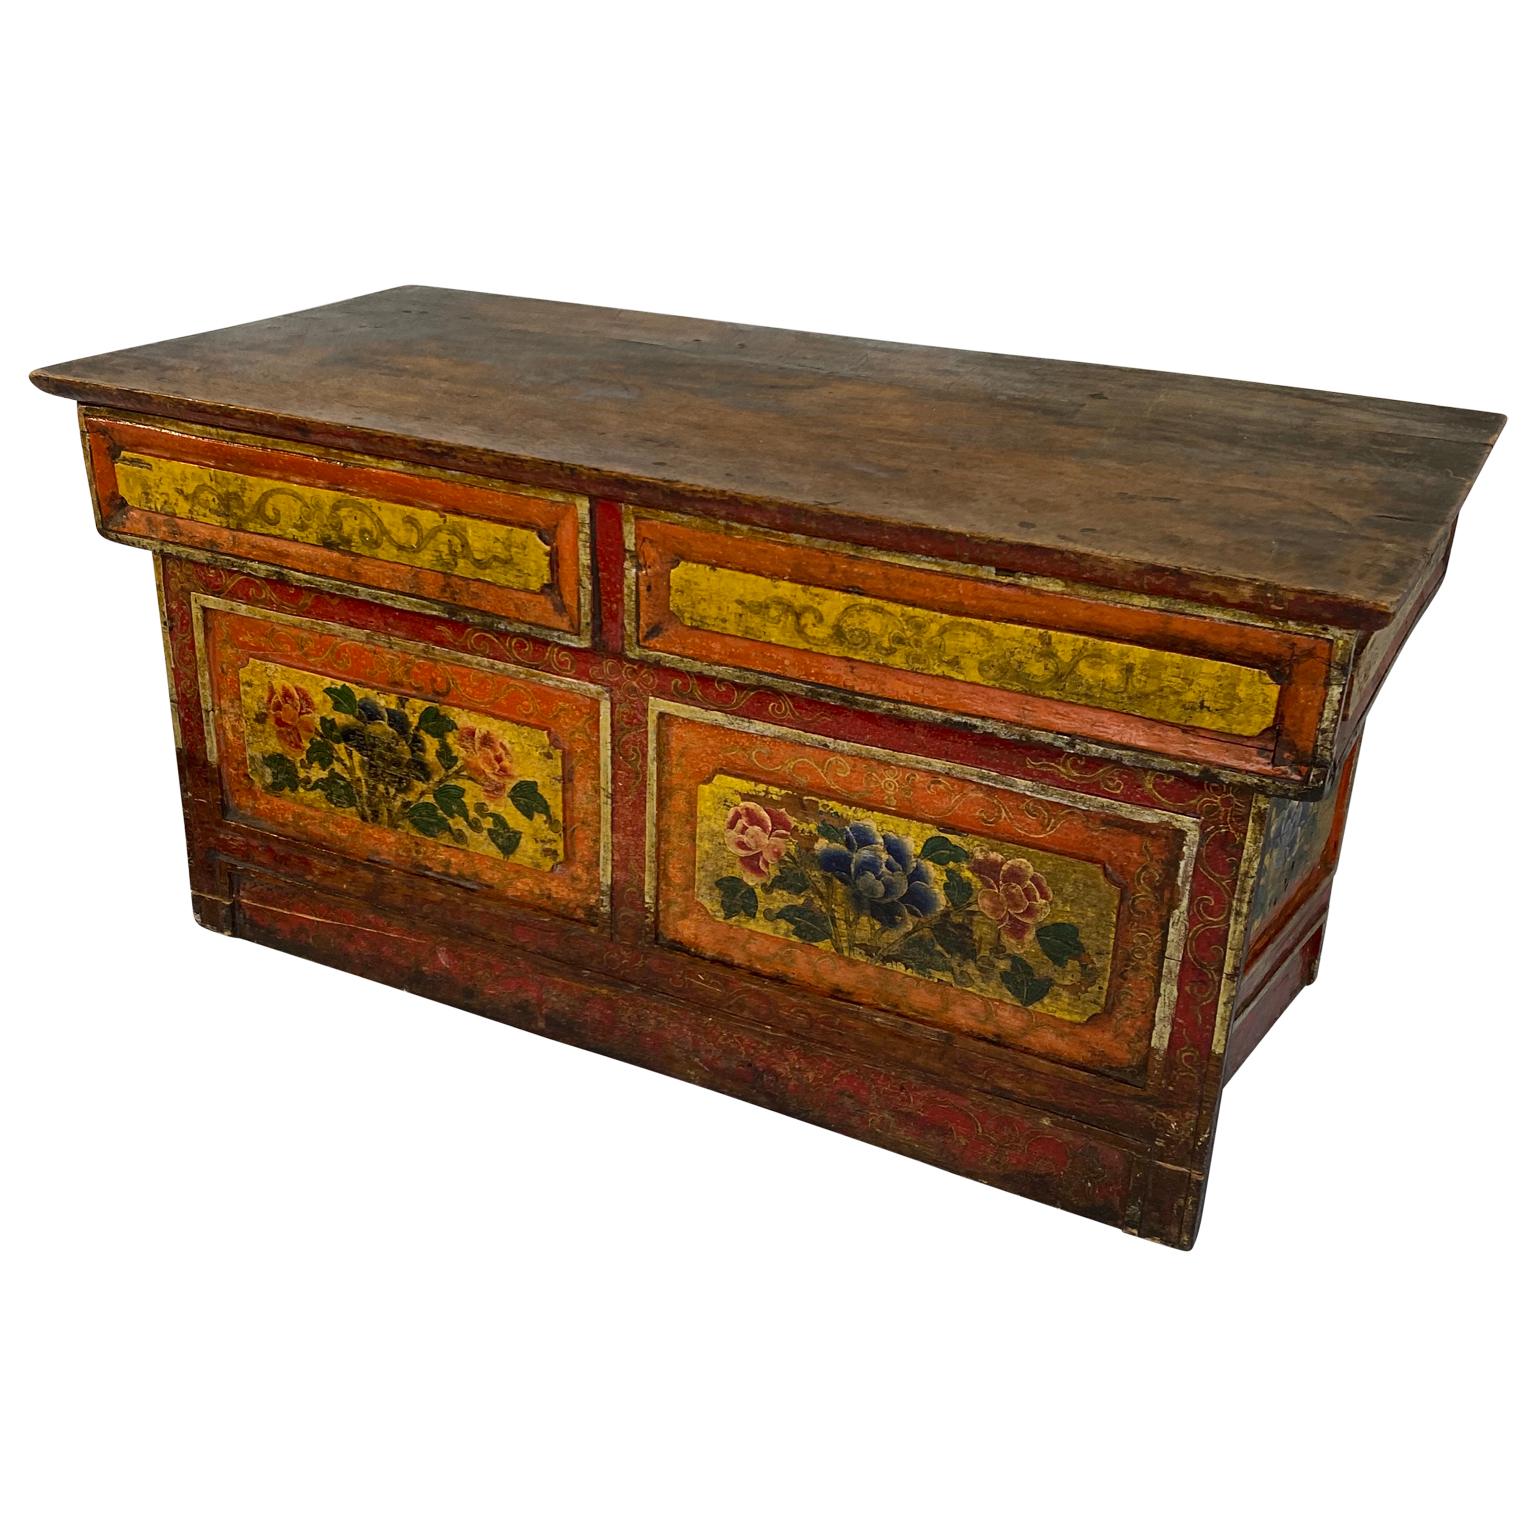 Hand-Painted Small Asian Red And Yellow Painted Folk Art Desk-Top Writing Desk